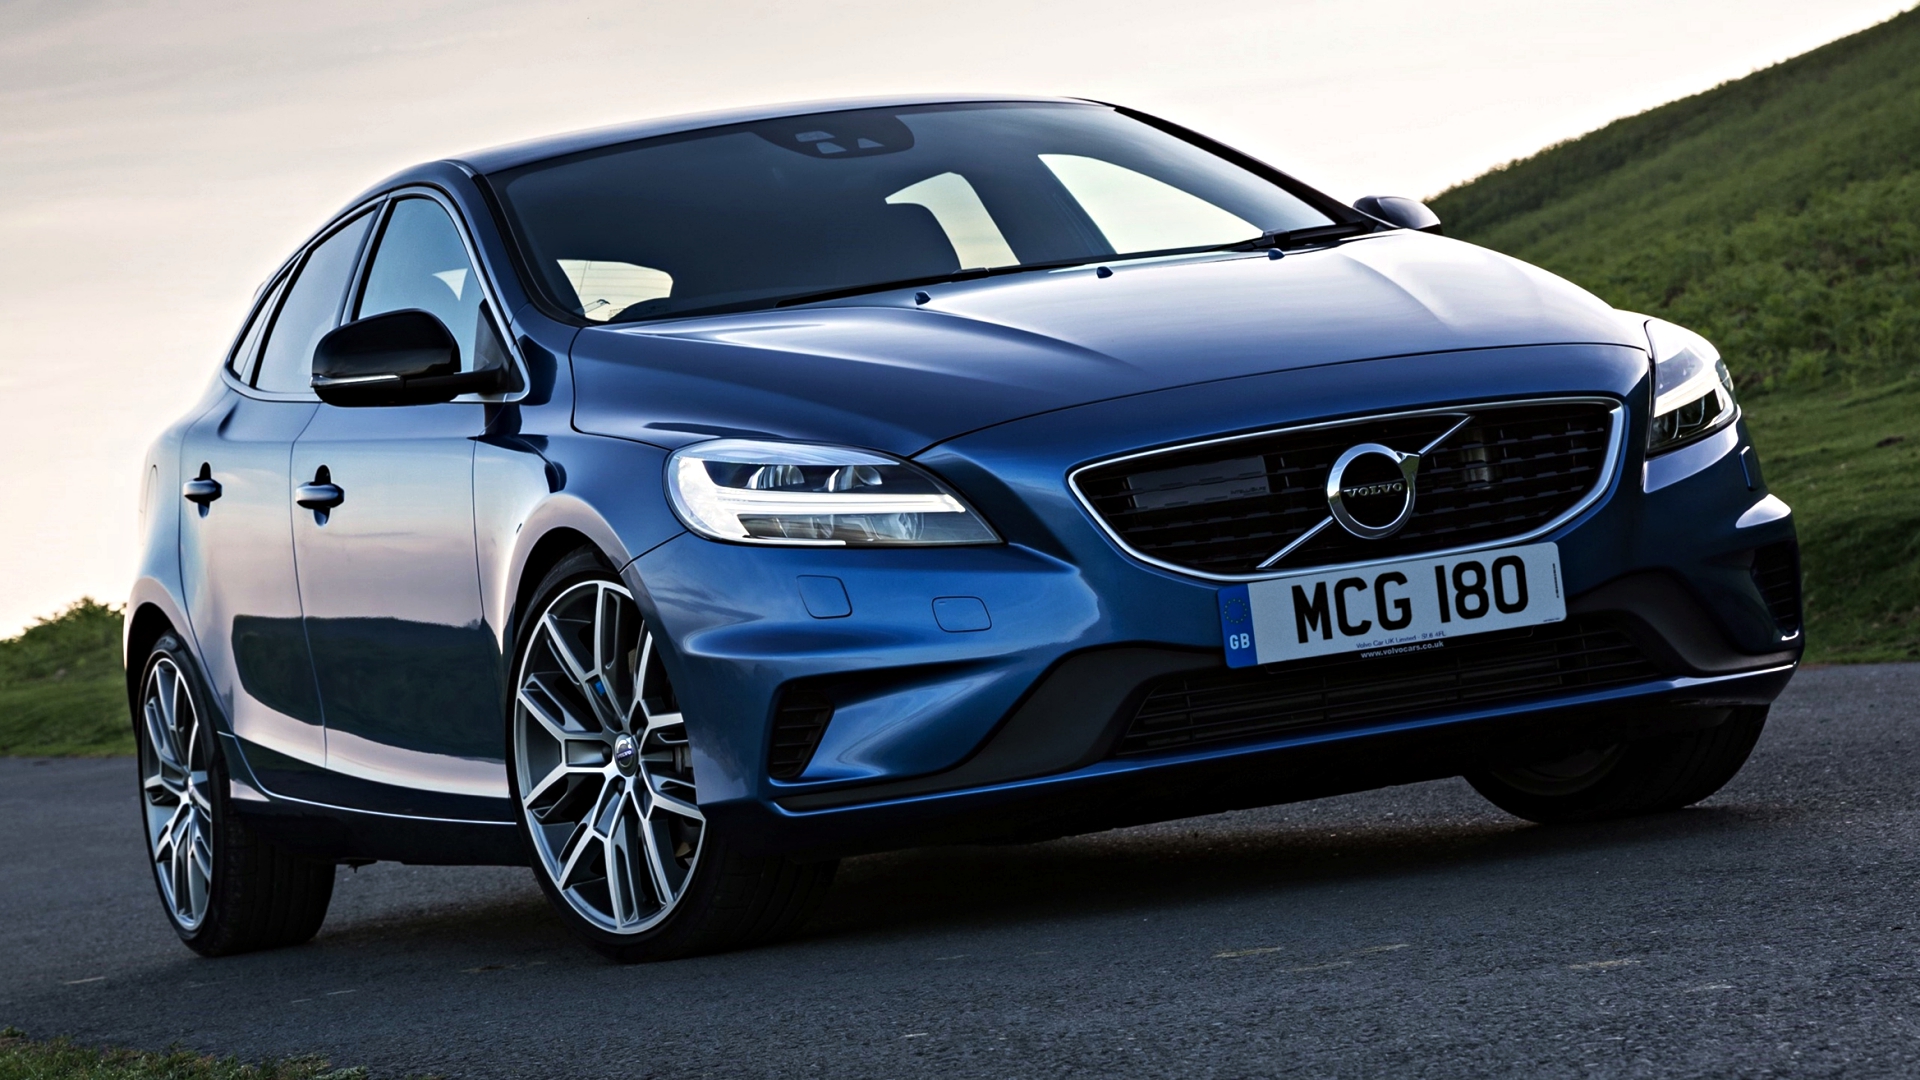 News - Volvo Won’t Replace The V40, Sort Of – Report